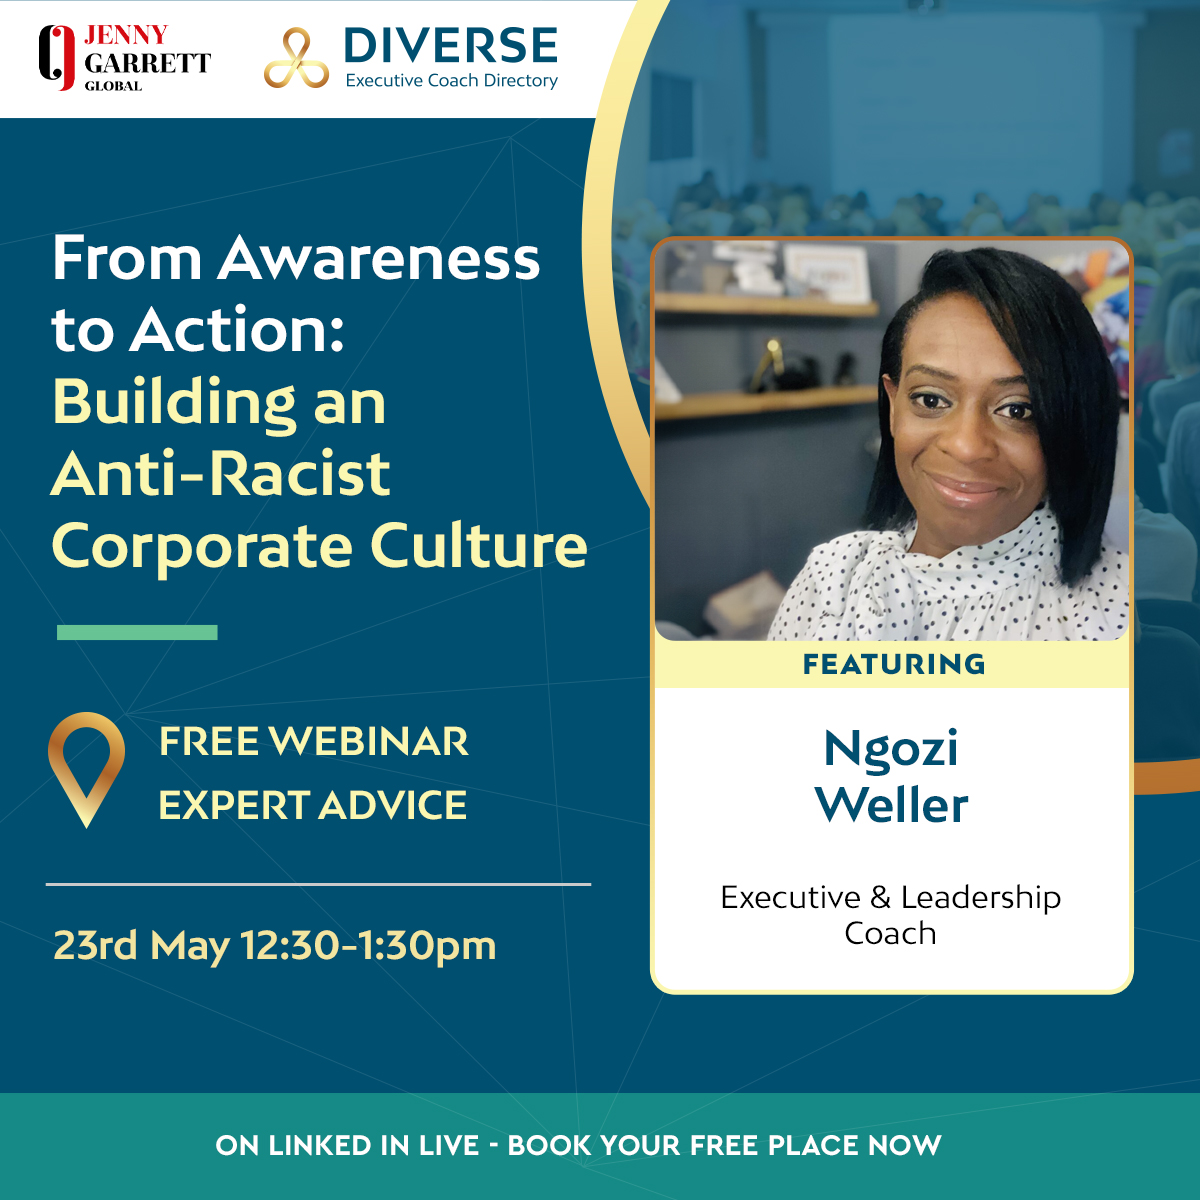 Transforming workplaces starts with taking action. Join us for an empowering webinar on building an anti-racist corporate culture featuring @NgoziWeller. Register Now at: tinyurl.com/um5ekv2x
#FromAwarenessToAction #webinar #linkedinLive #DEI #CorporateCulture